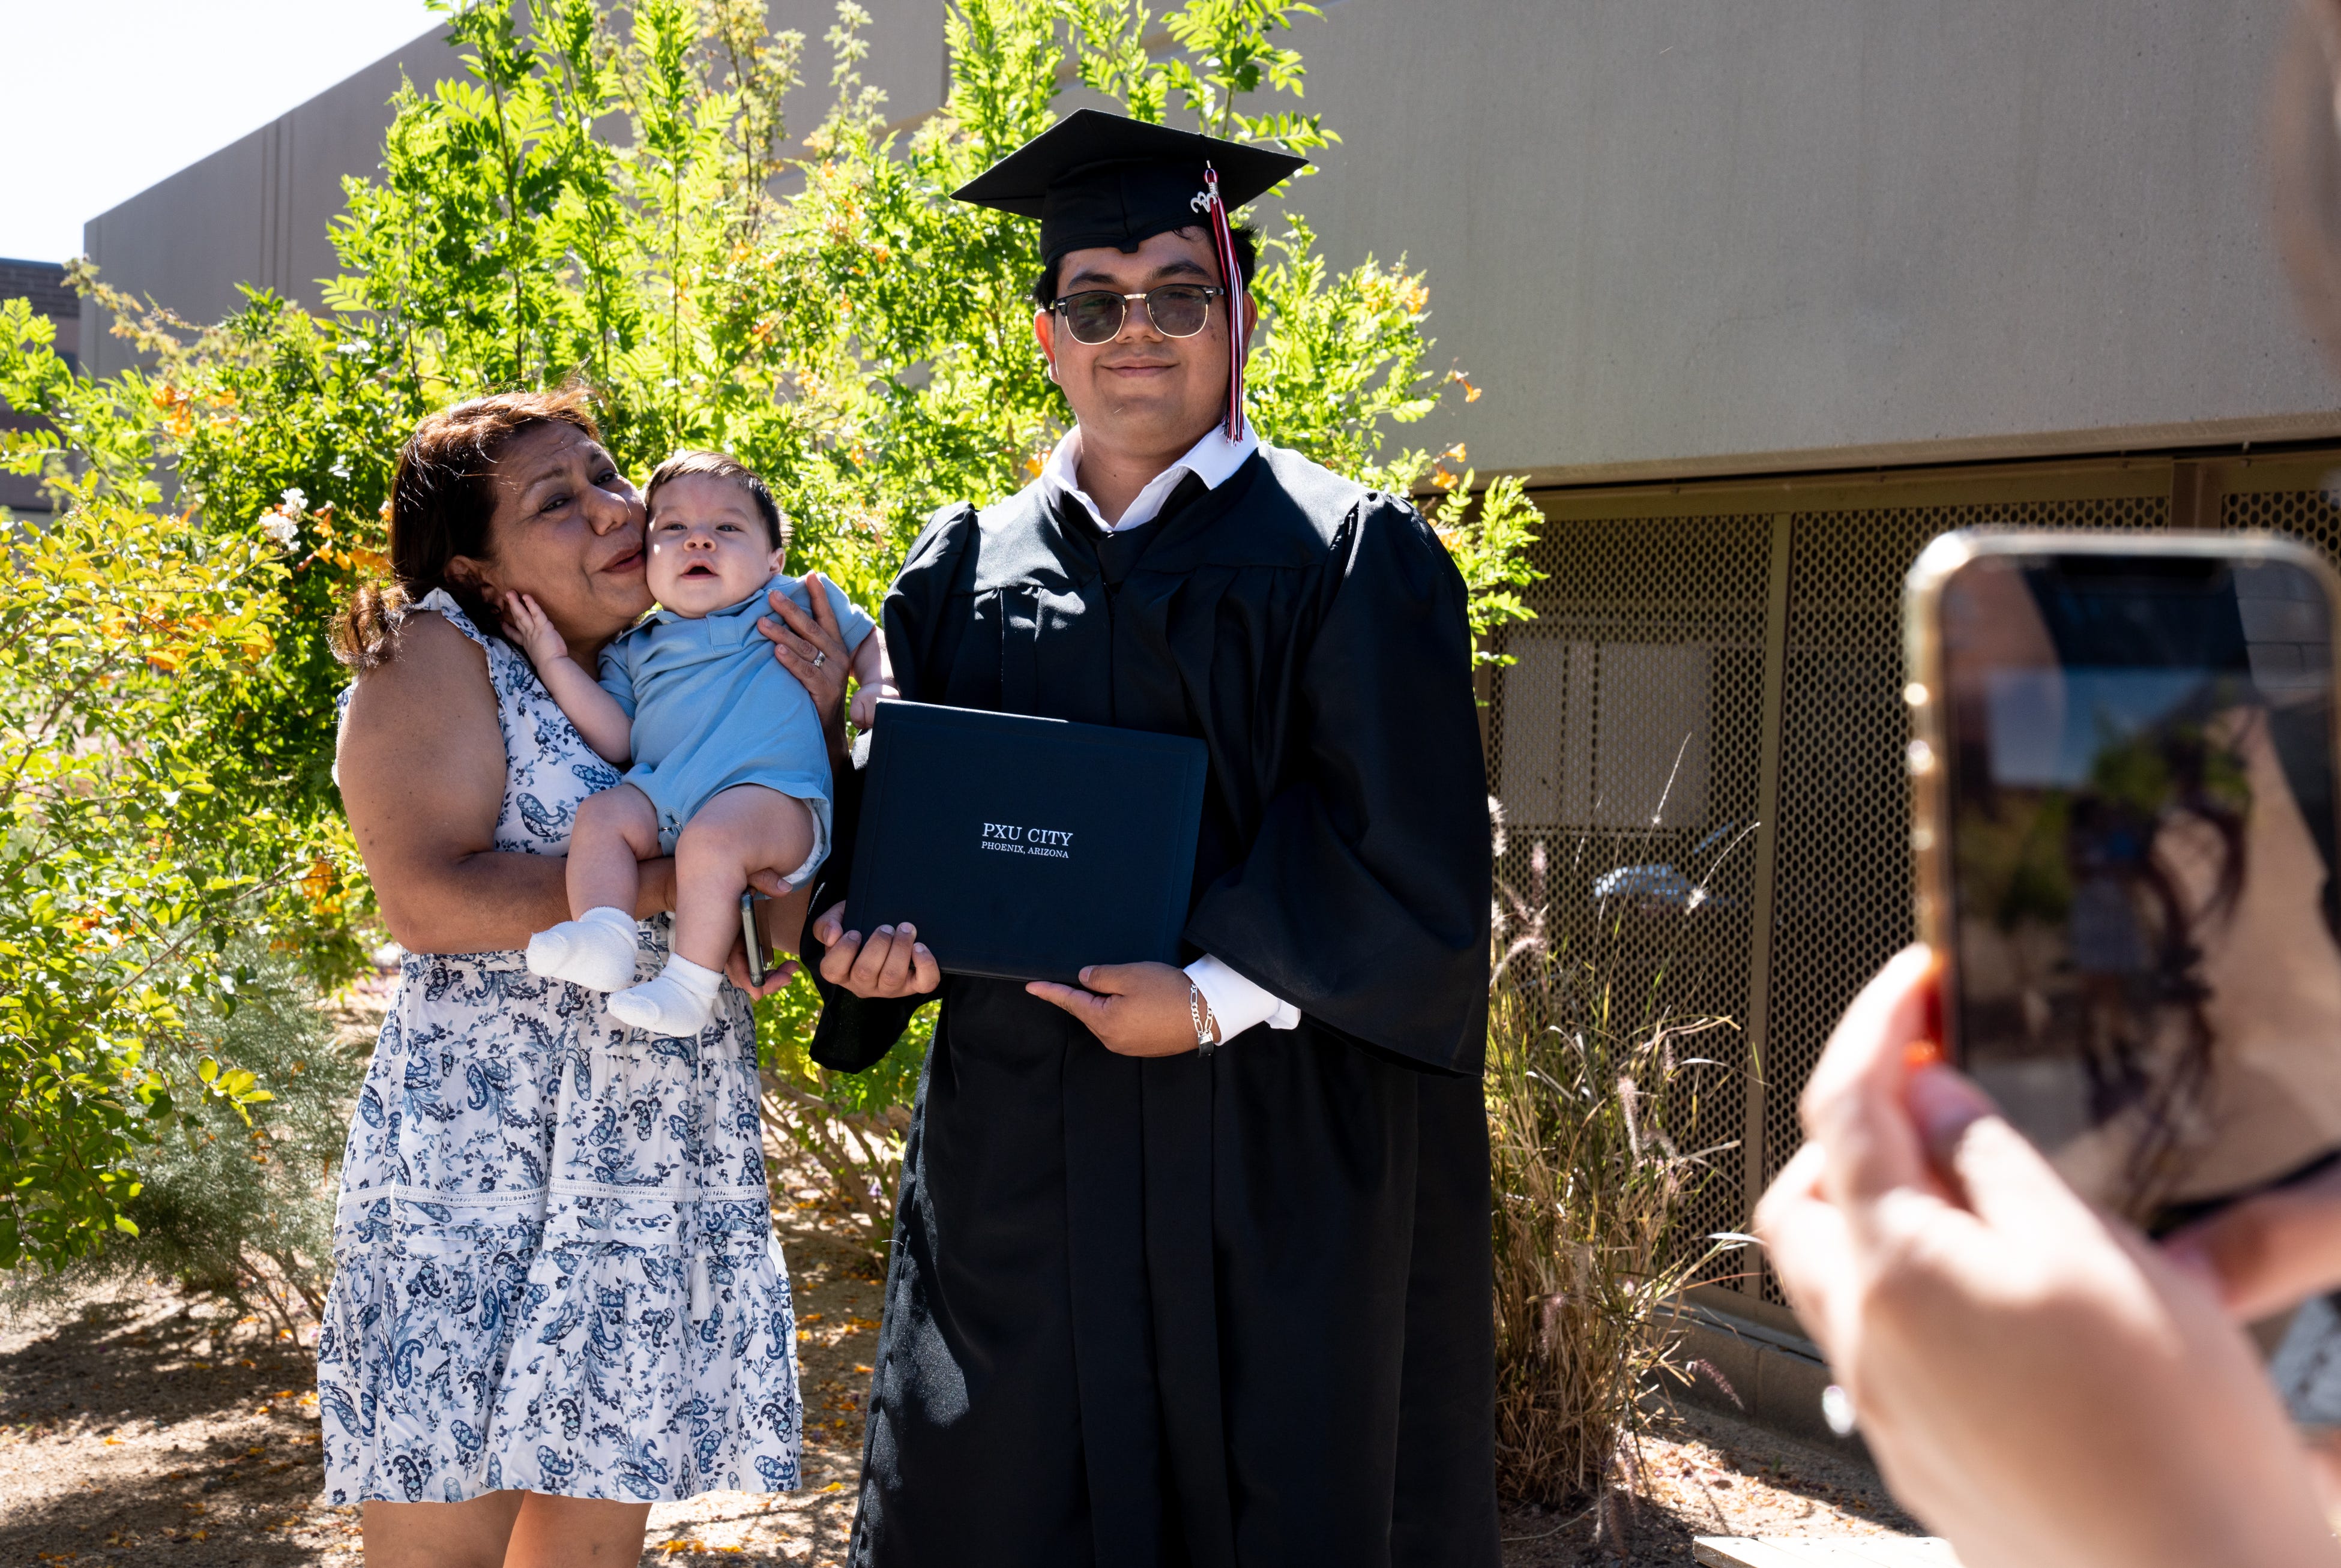 PXU City student Ali Gonzalez (right) has his photo taken with his mom, Silvia Choperena (left) and his nephew, Lukia Gonzalez (center), on May 24, 2023, after his graduation ceremony at the Madison Center for the Arts in Phoenix.